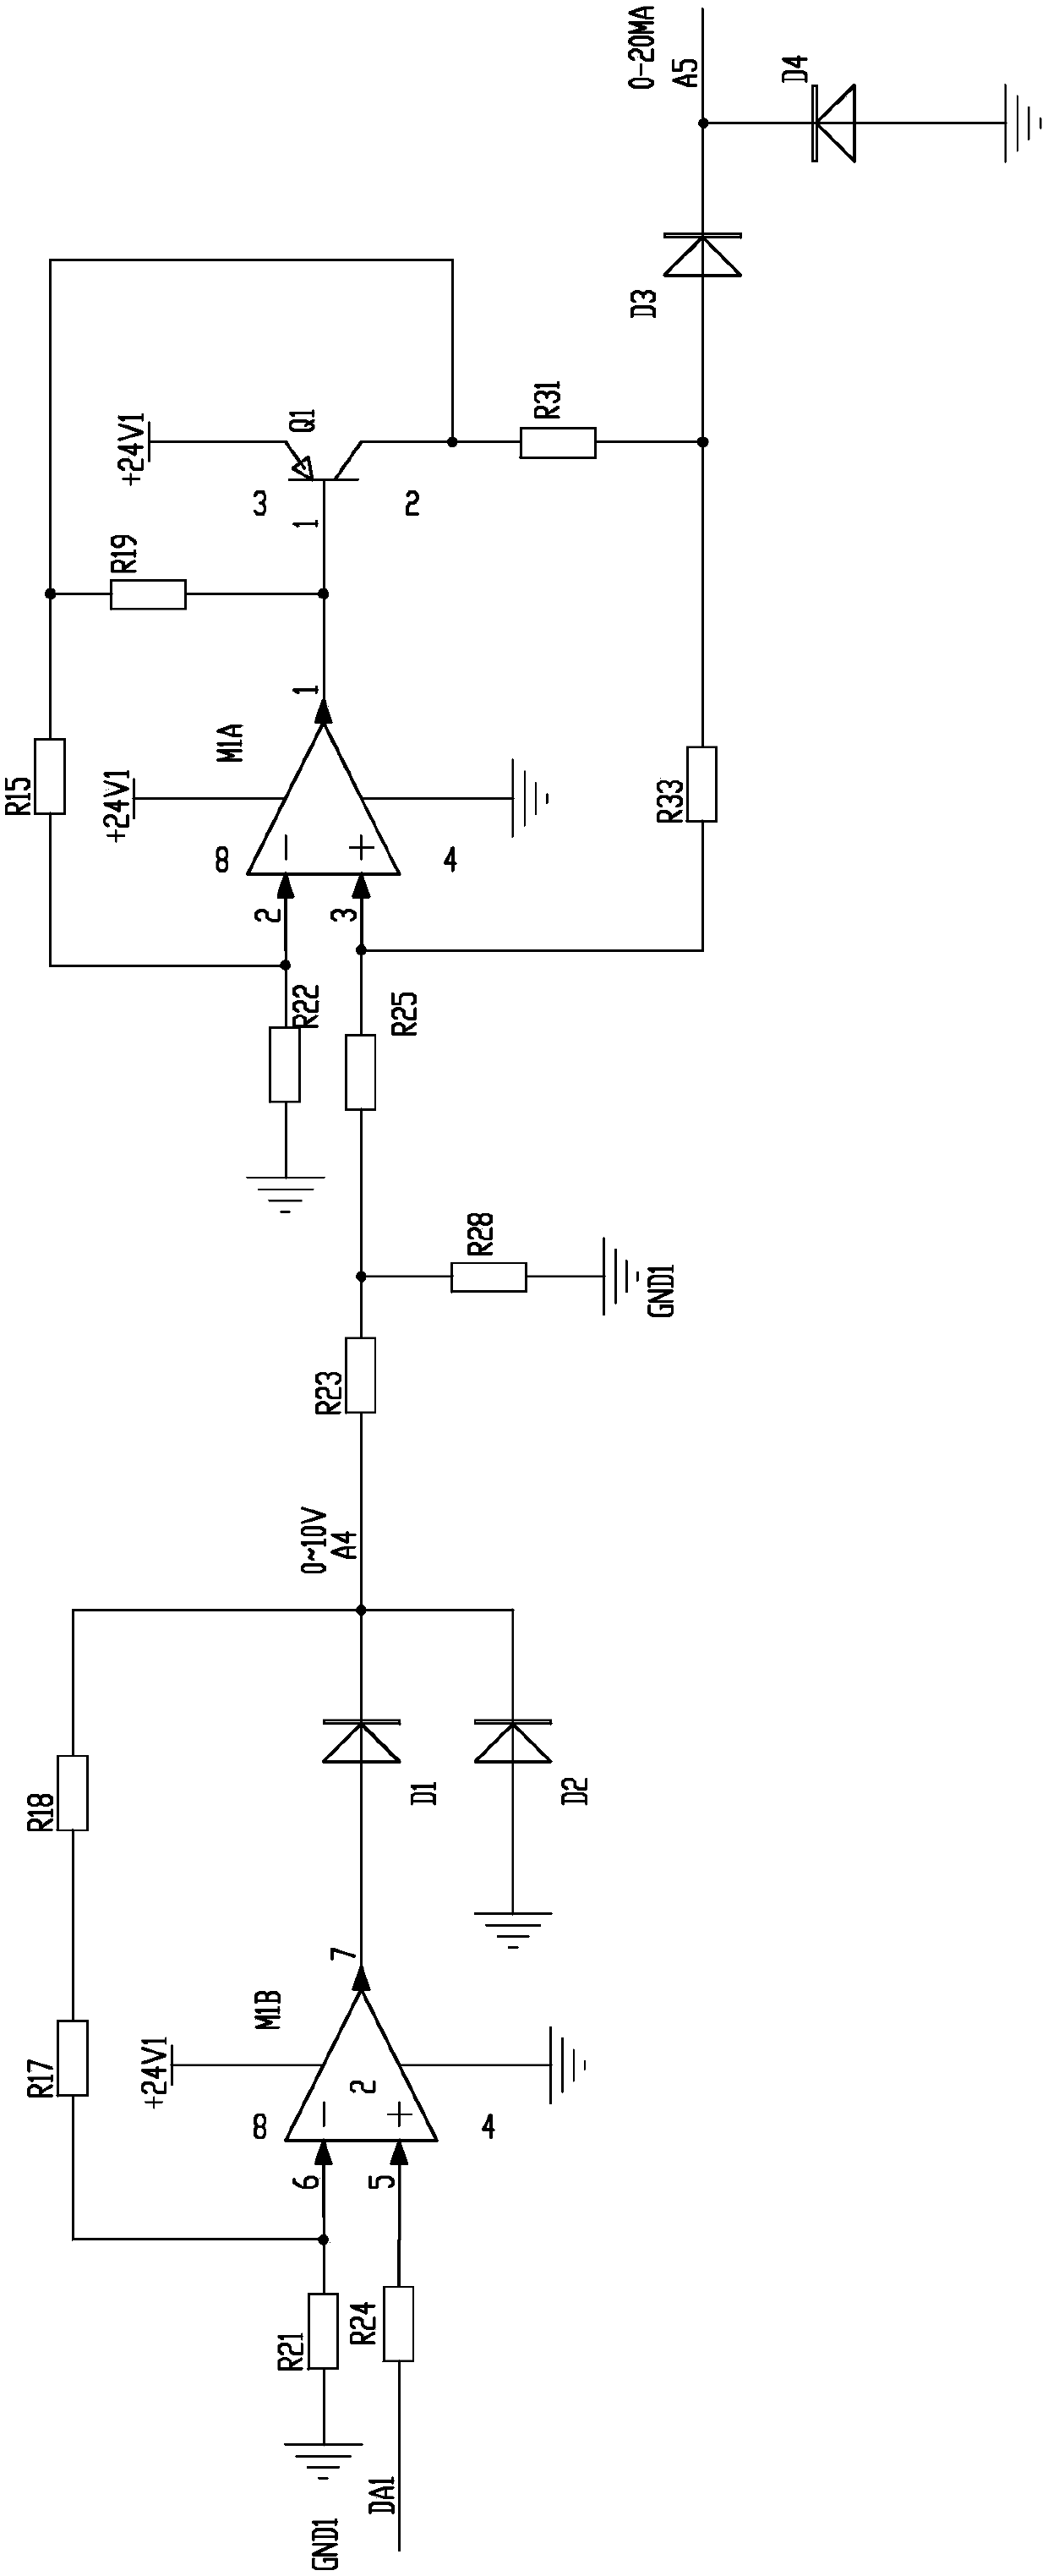 An analog signal output circuit of a central air-conditioning partition controller